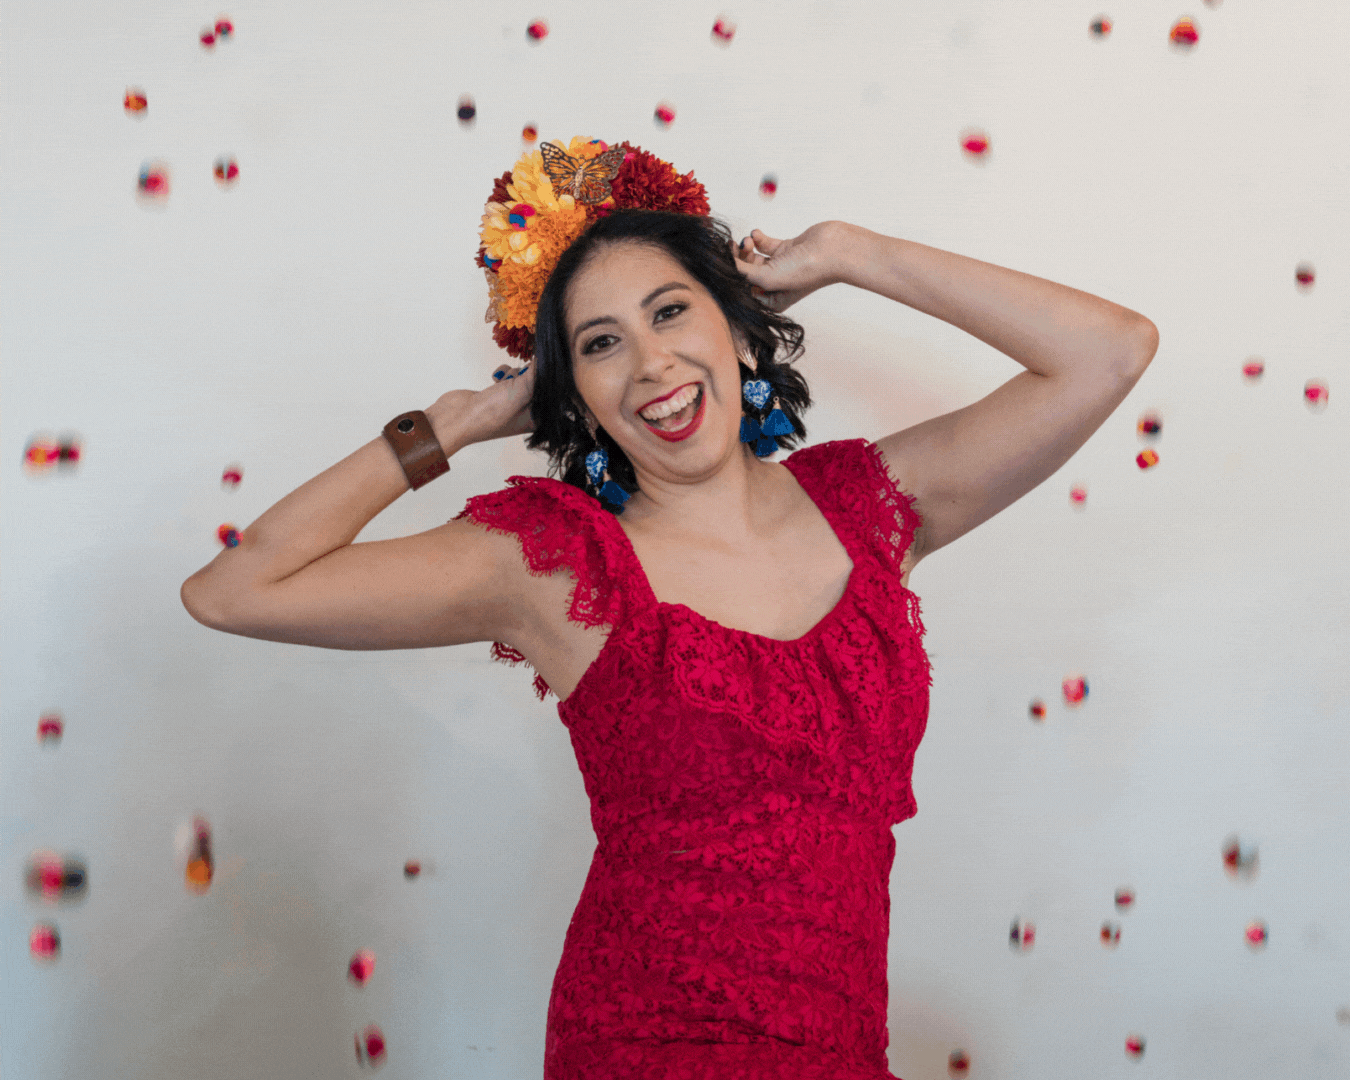 The founder of our craft workshops wears her donned in a captivating red lace dress, a flower crown, and chic accessories, as she dances with colorful confetti against a pristine white canvas. Explore the art of crafting and self-expression at Soleil Vida Studio, where every detail tells a story of inspiration and empowerment.